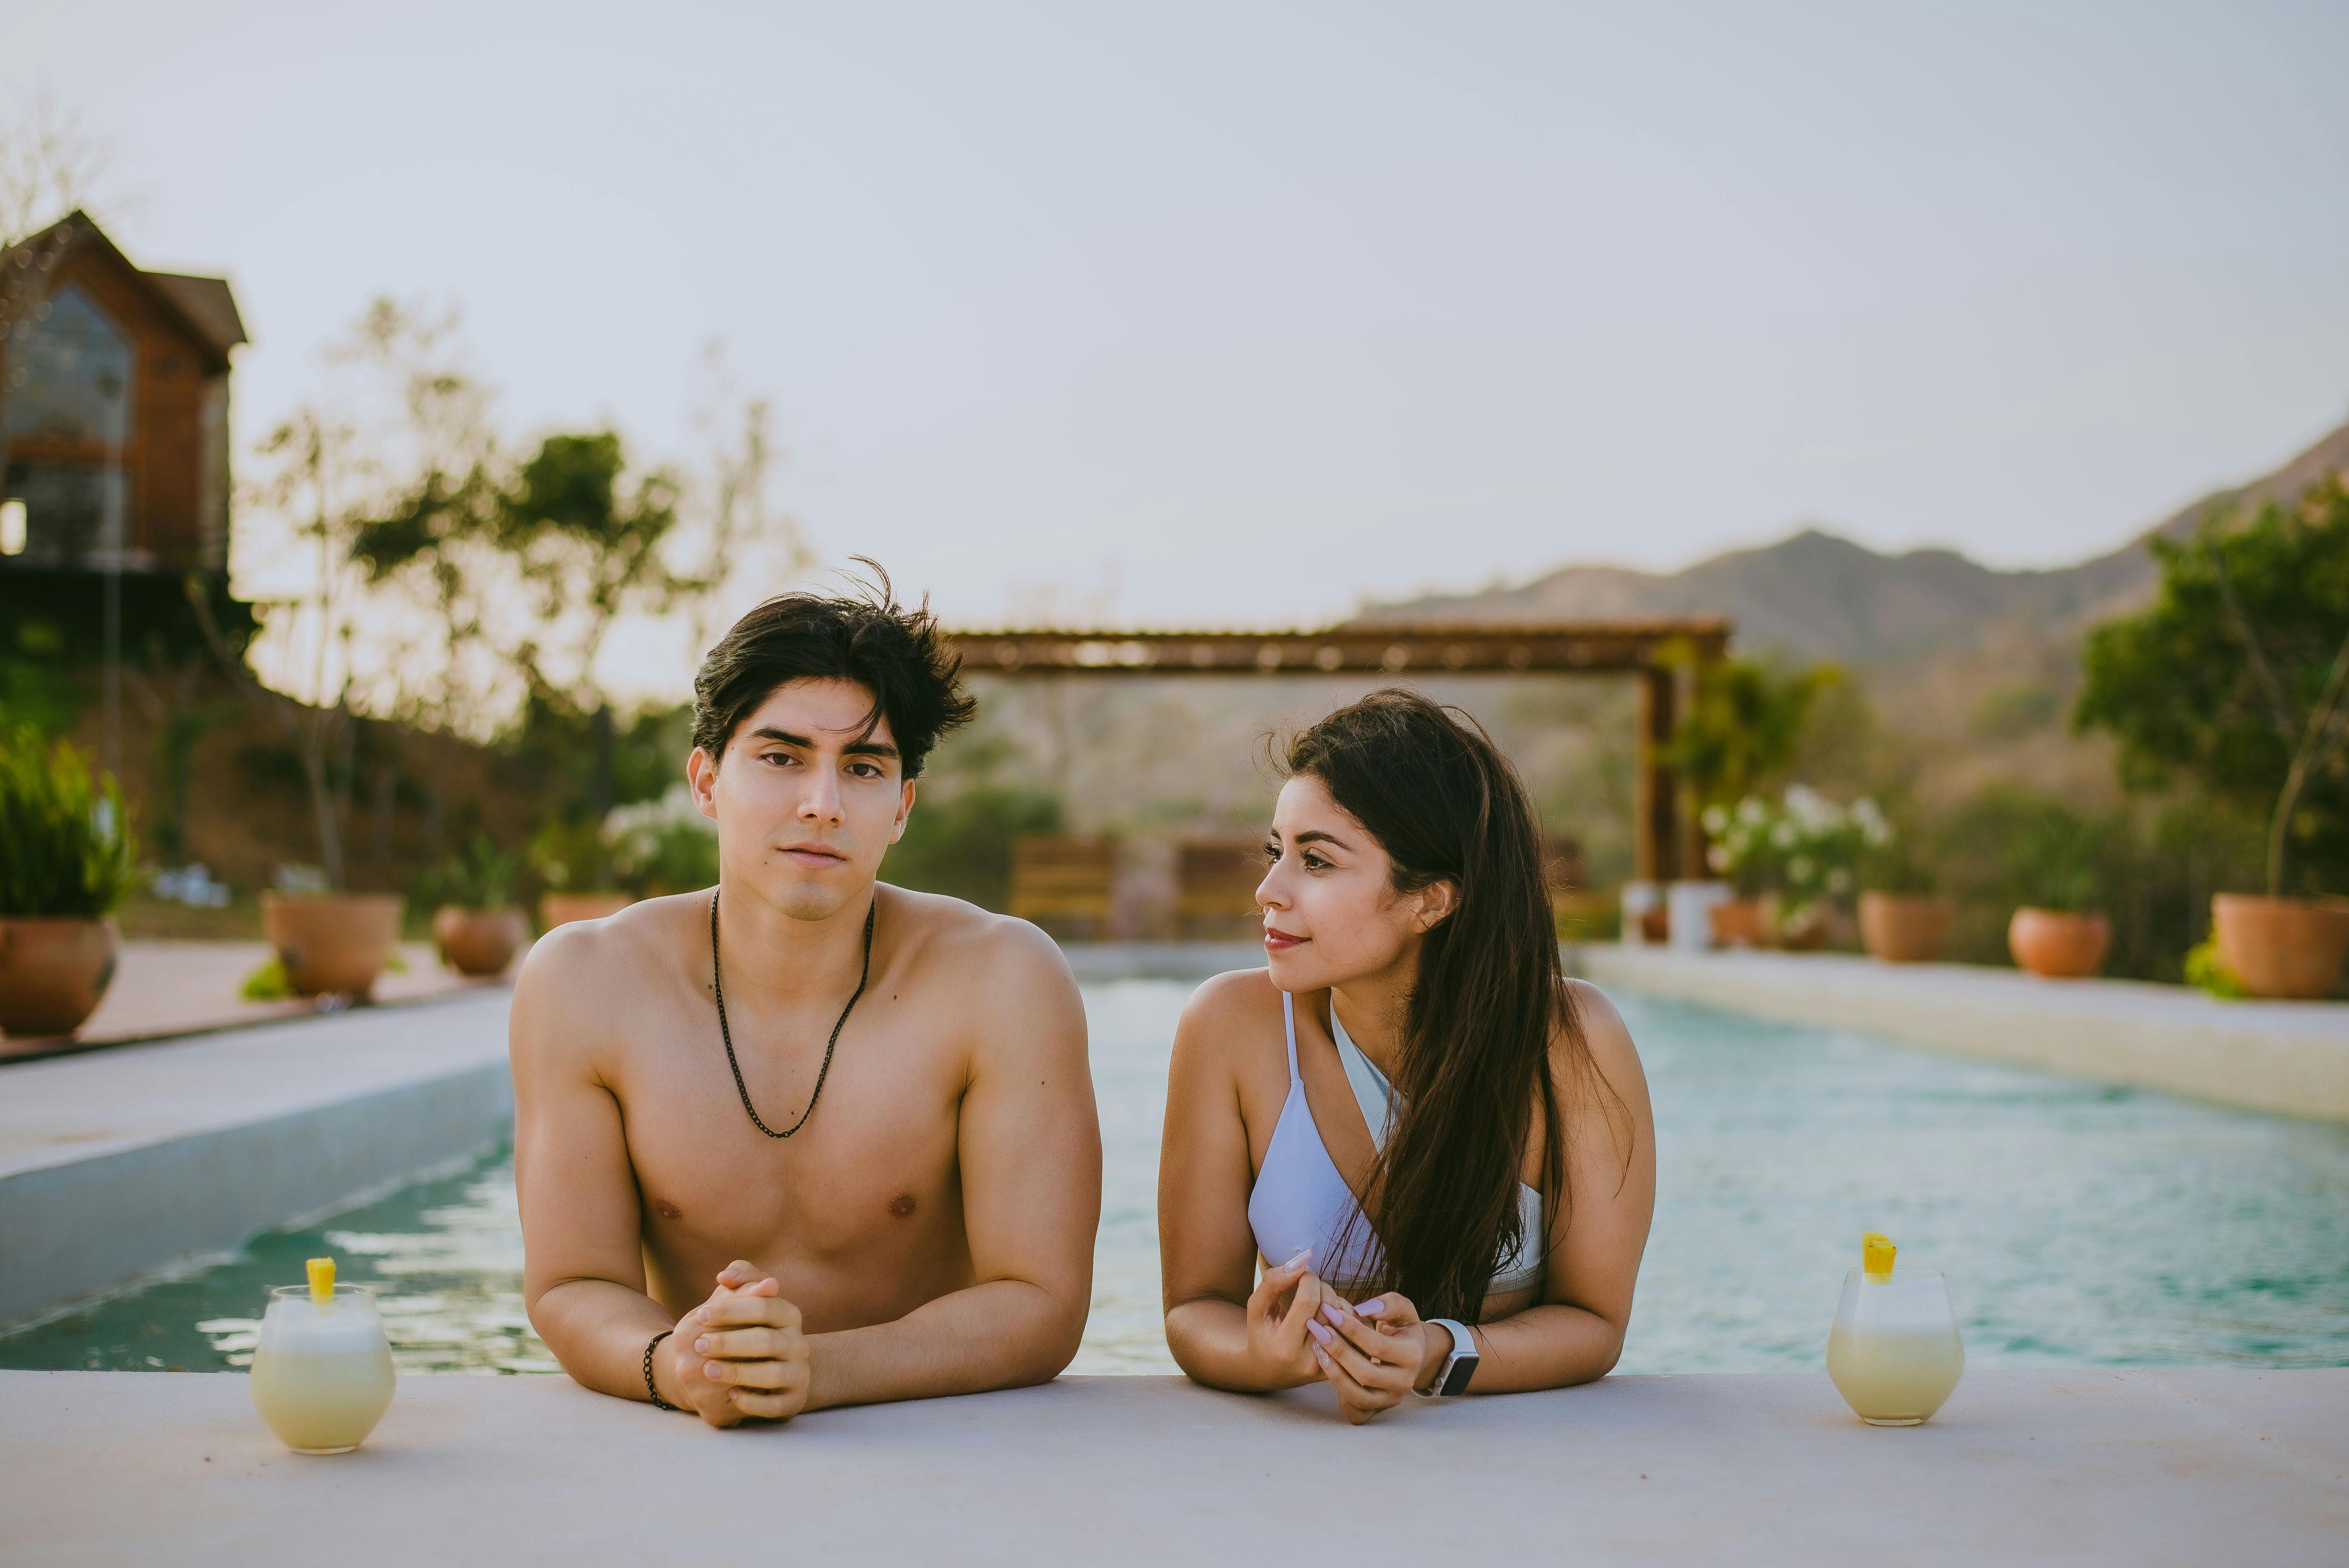 Infinity pool couple Images - Search Images on Everypixel